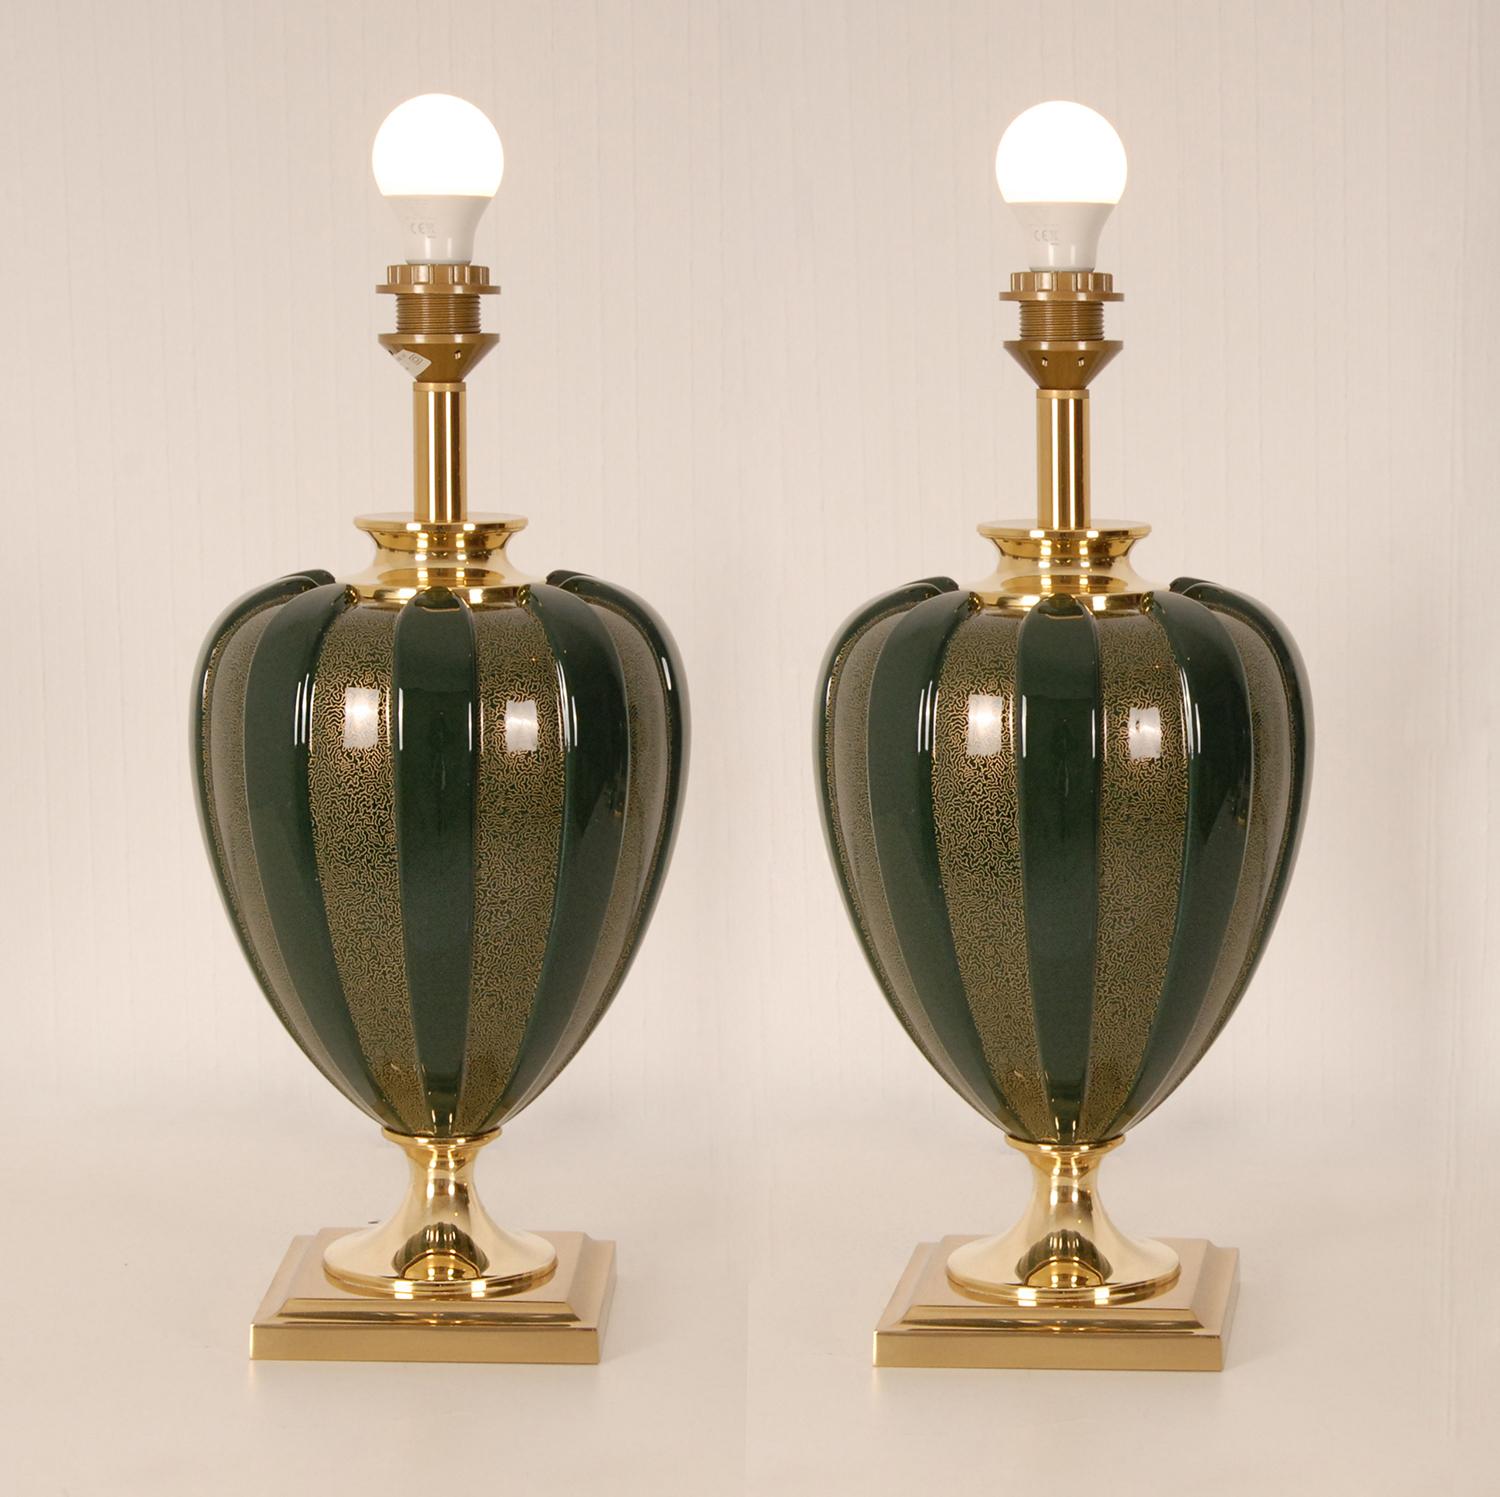 A pair tall high end French ceramic table lamps
Design: Maison Le Dauphin
Style: Empire, Napoleonic, Regency, Vintage, Mid Century
Luxury lamps made of ceramic and gold gilded brass by Maison Le Dauphin
Marked: Both lamps are marked on the backe of